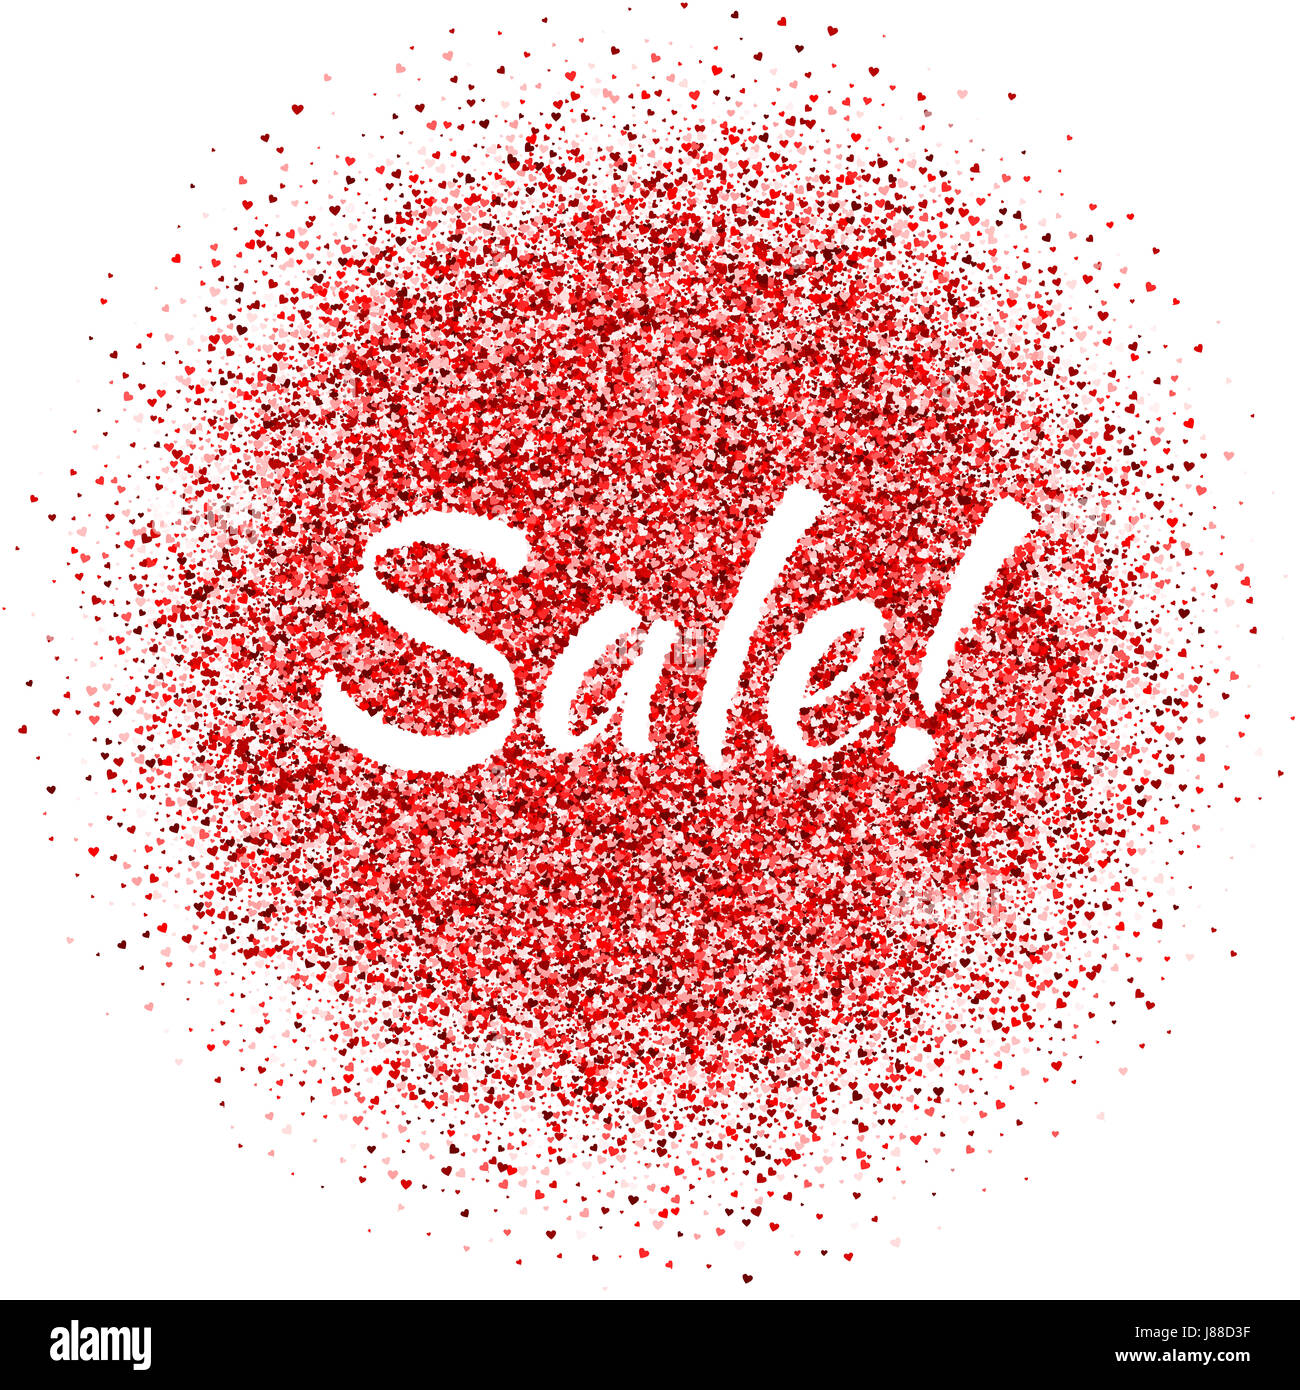 Red dust with Sale sign. Glitter. Sale shimmer. Sparkling text. Stock Photo